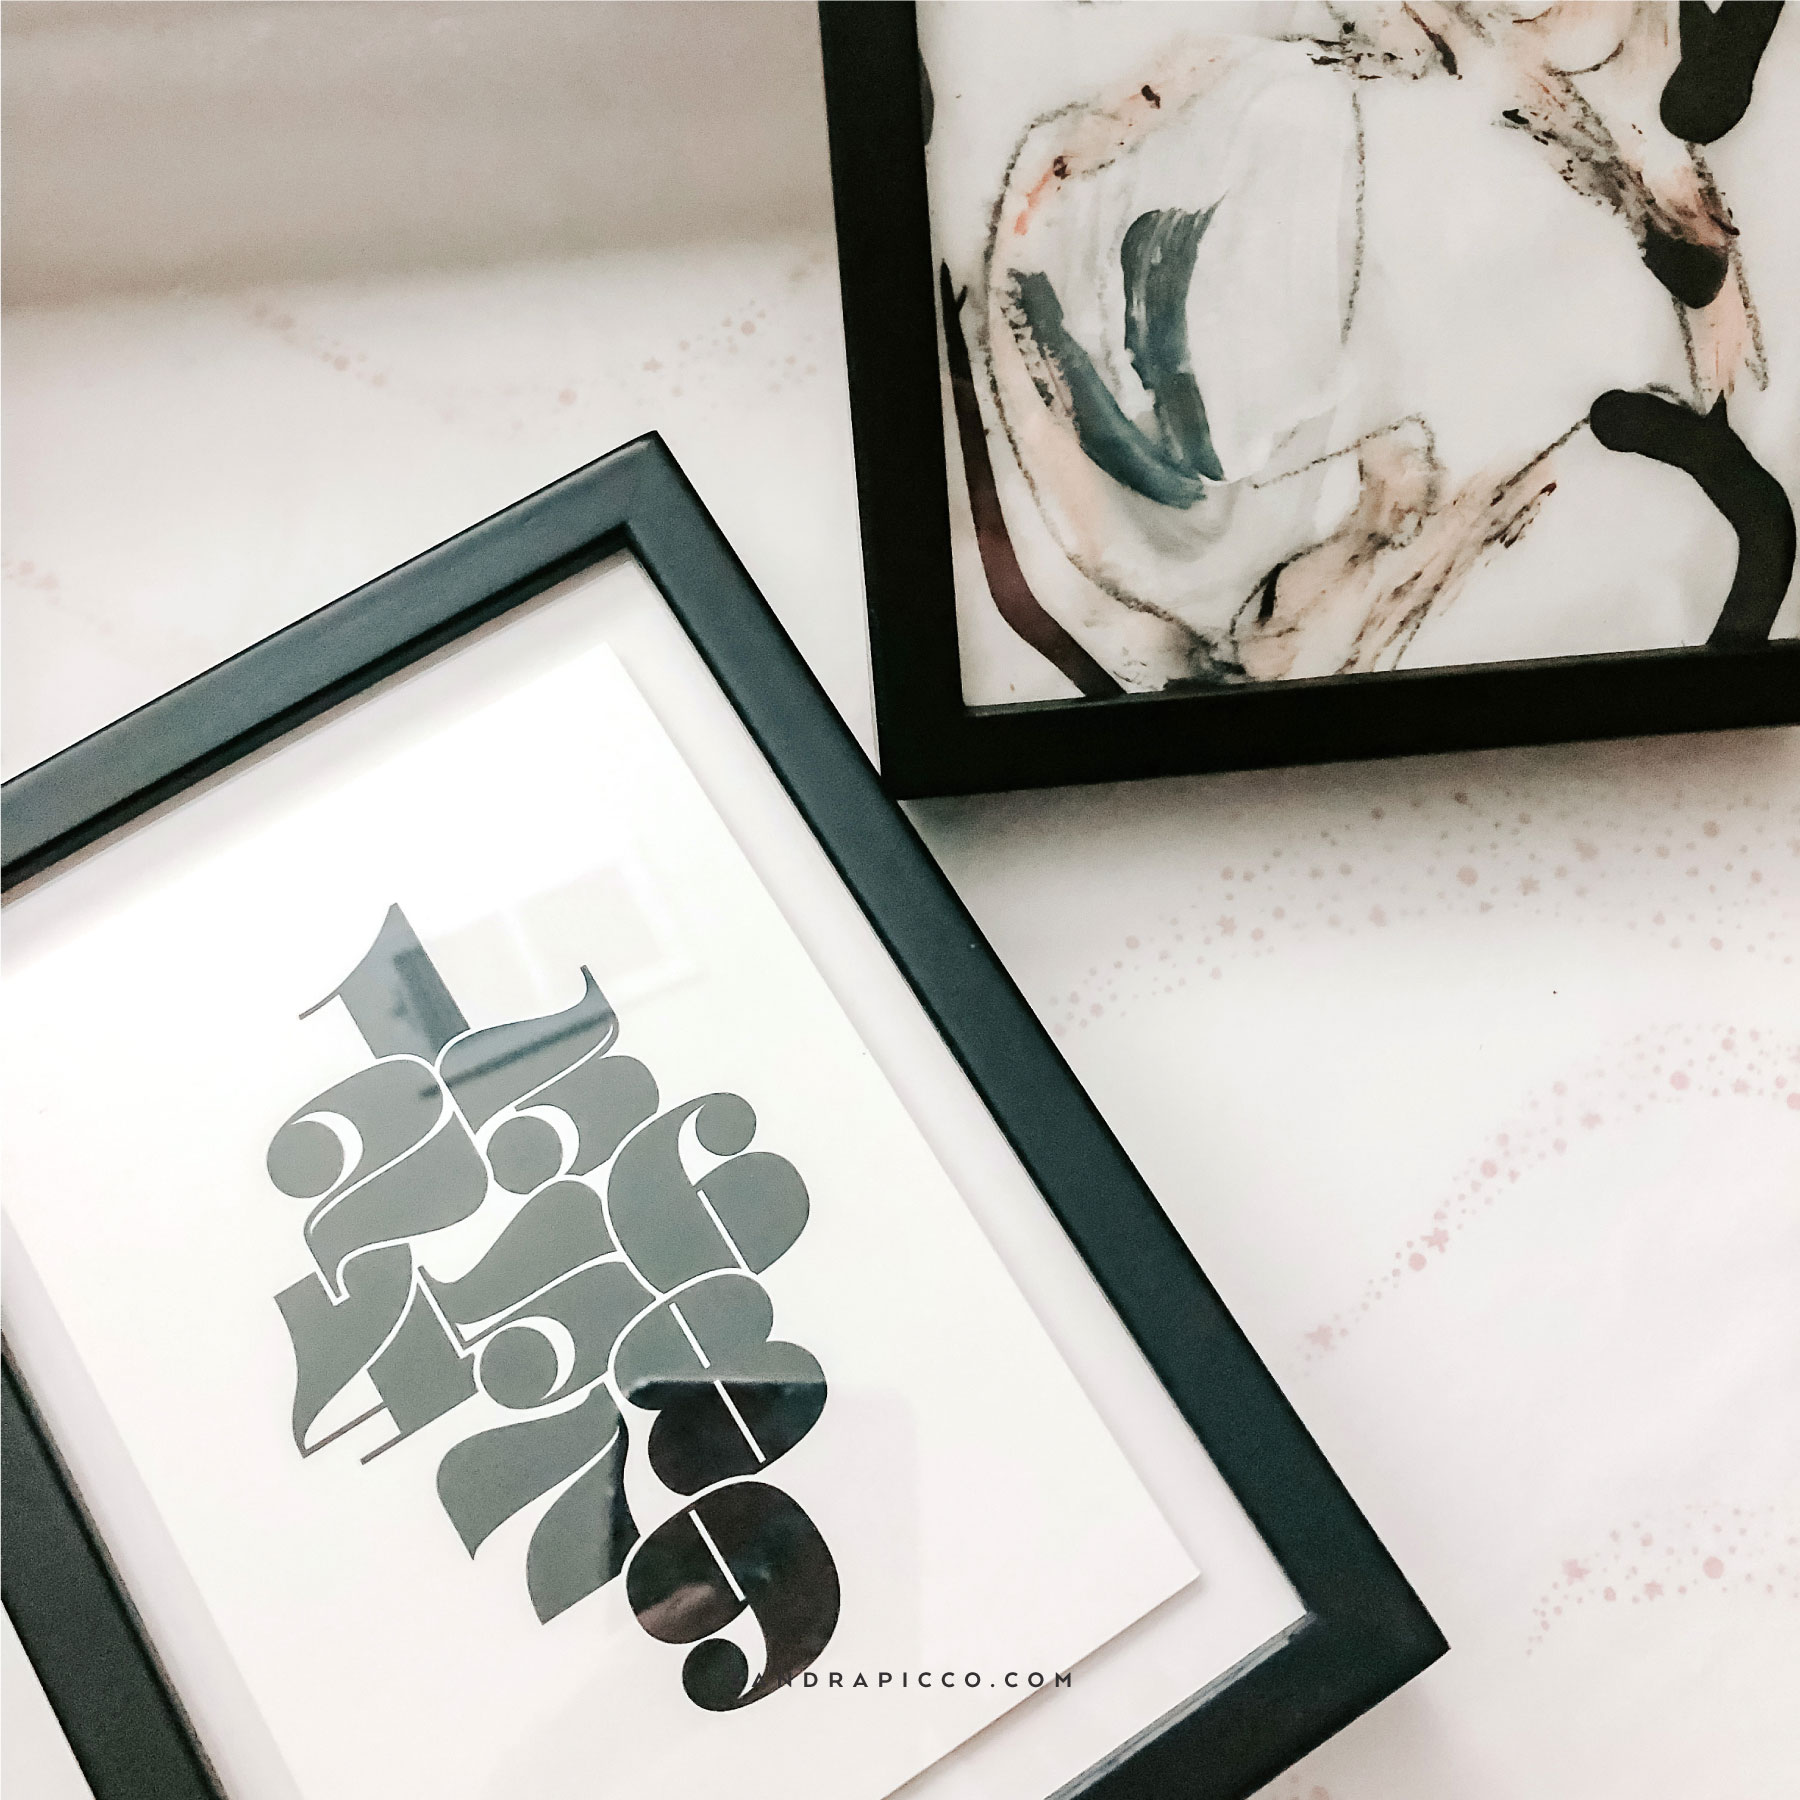 Minted art prints from the Minted More membership box, plus a holiday discount